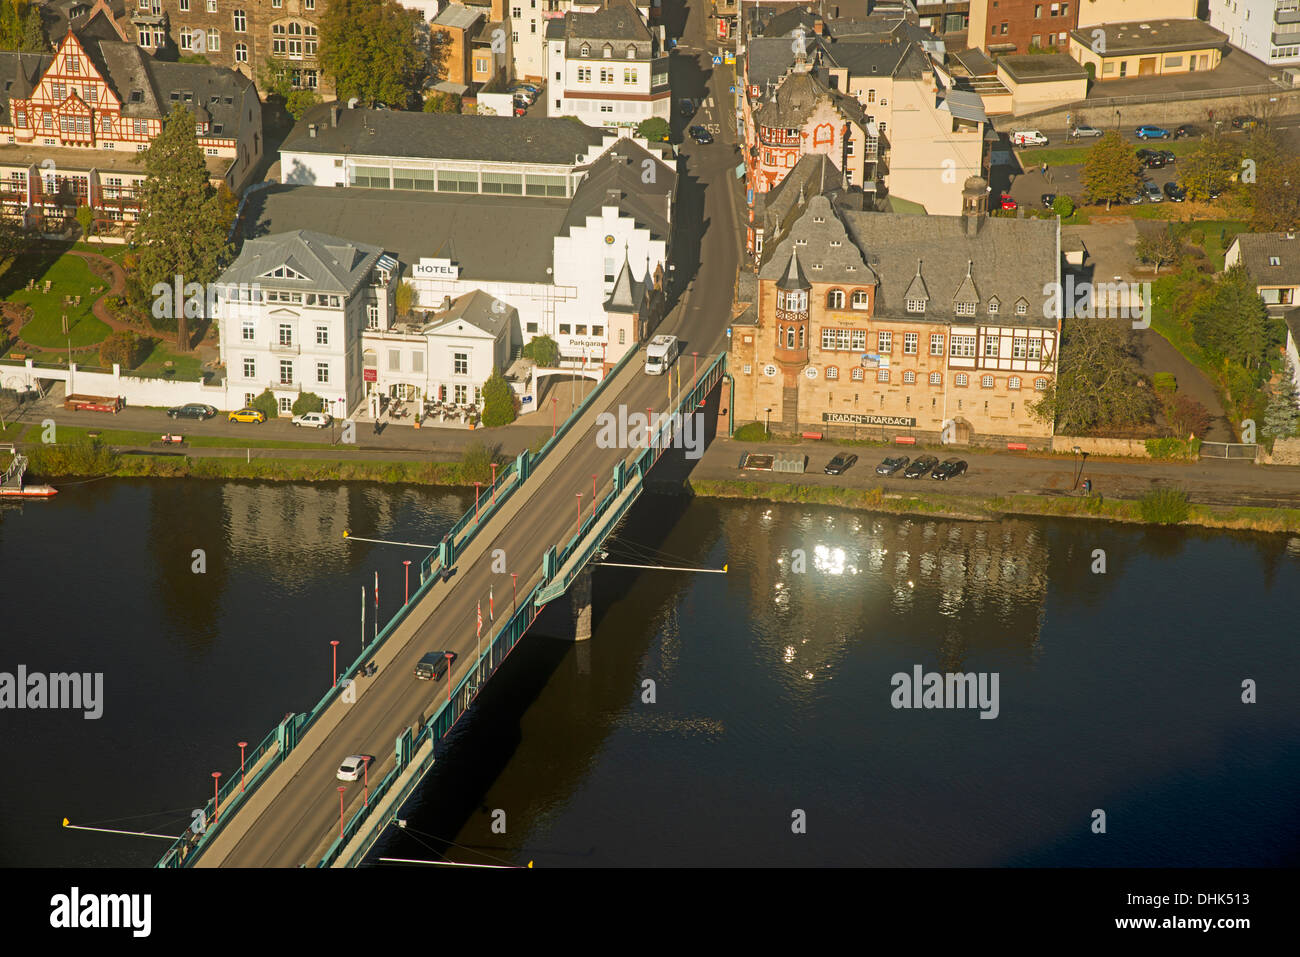 Germany, Rhineland-Palatinate, Moselle valley, Traben-Trarbach, Moselle river Stock Photo